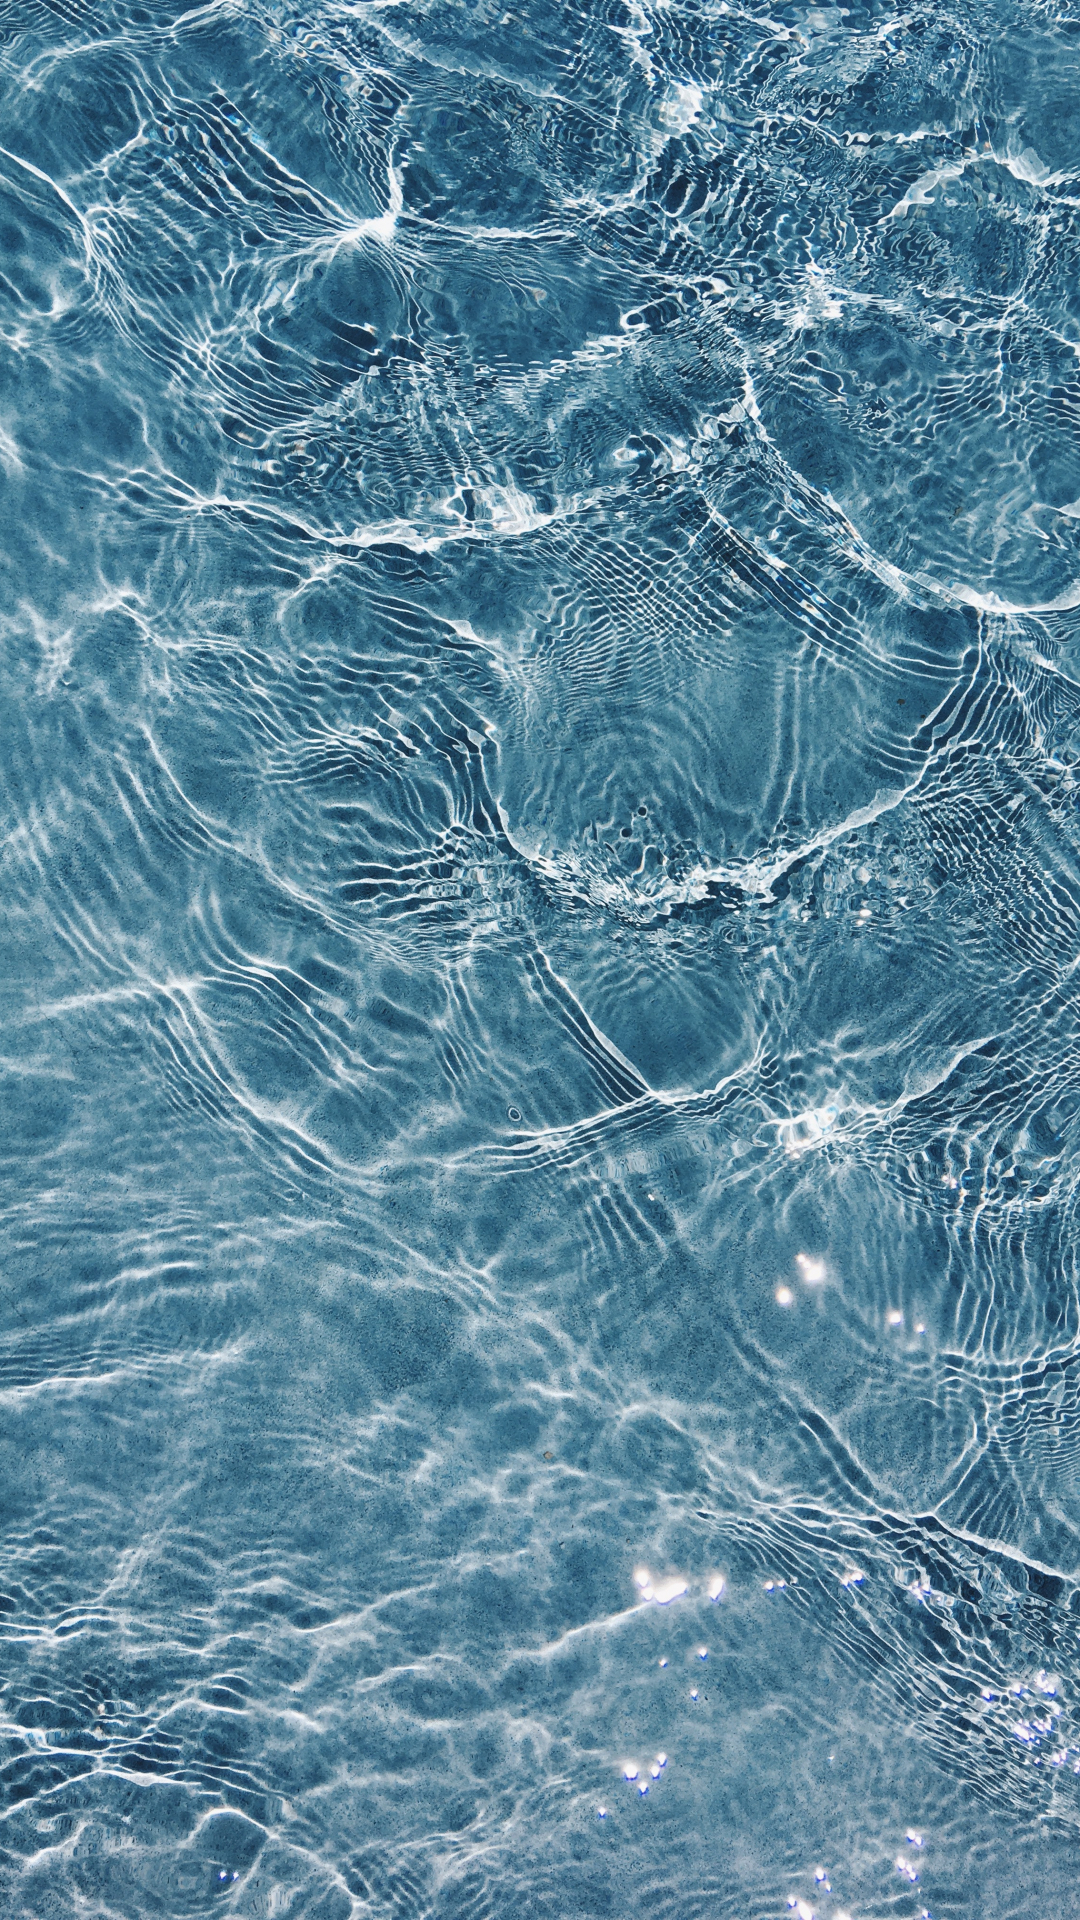 Swimming Pool Reflections iPhone Wallpaper